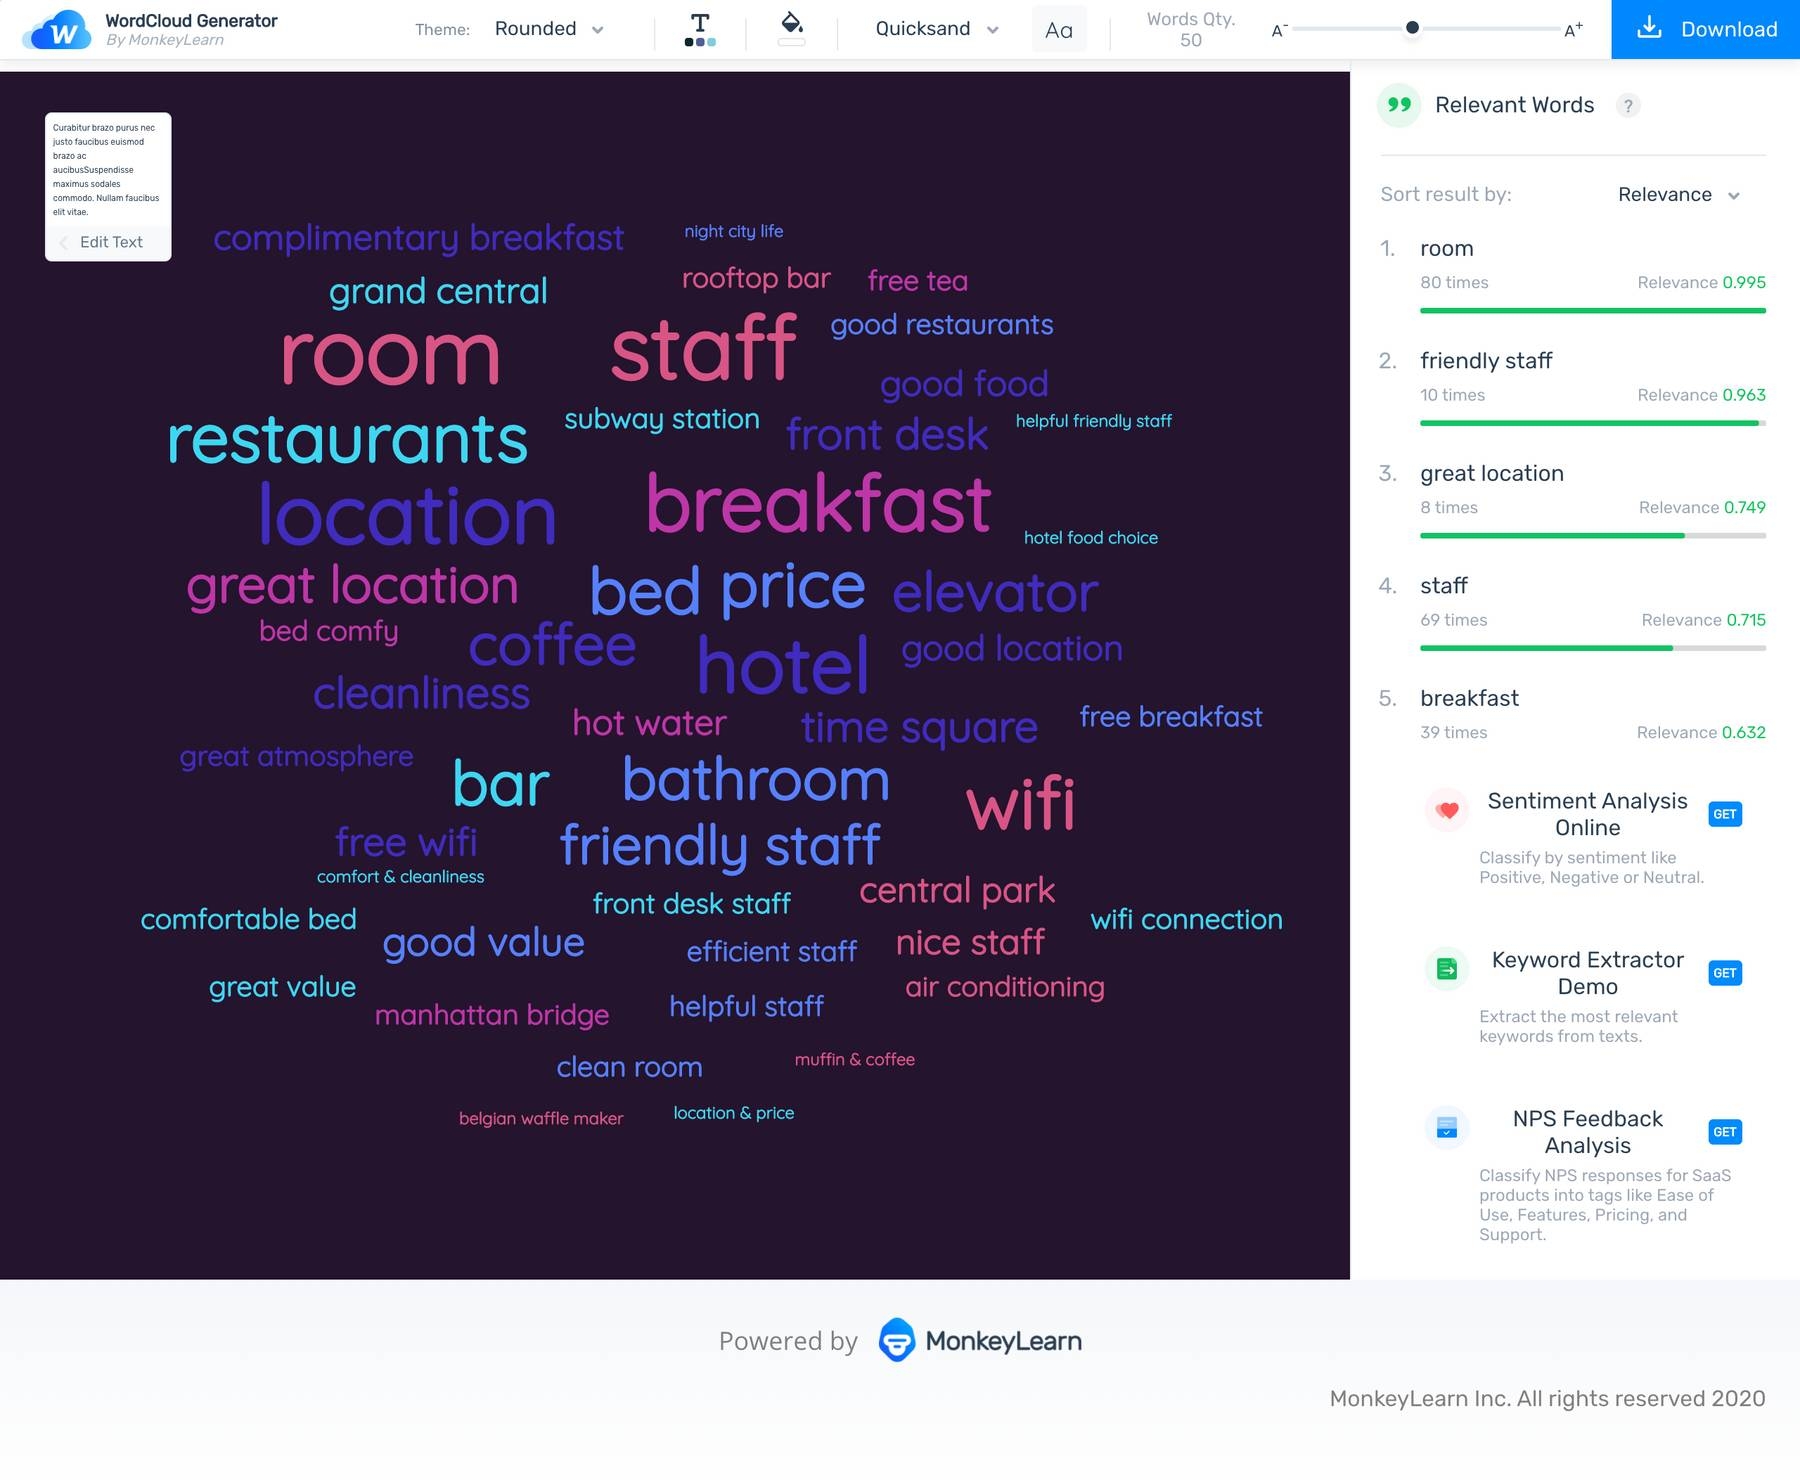 how to customize a word cloud in MonkeyLearn, by changing word quantity and color